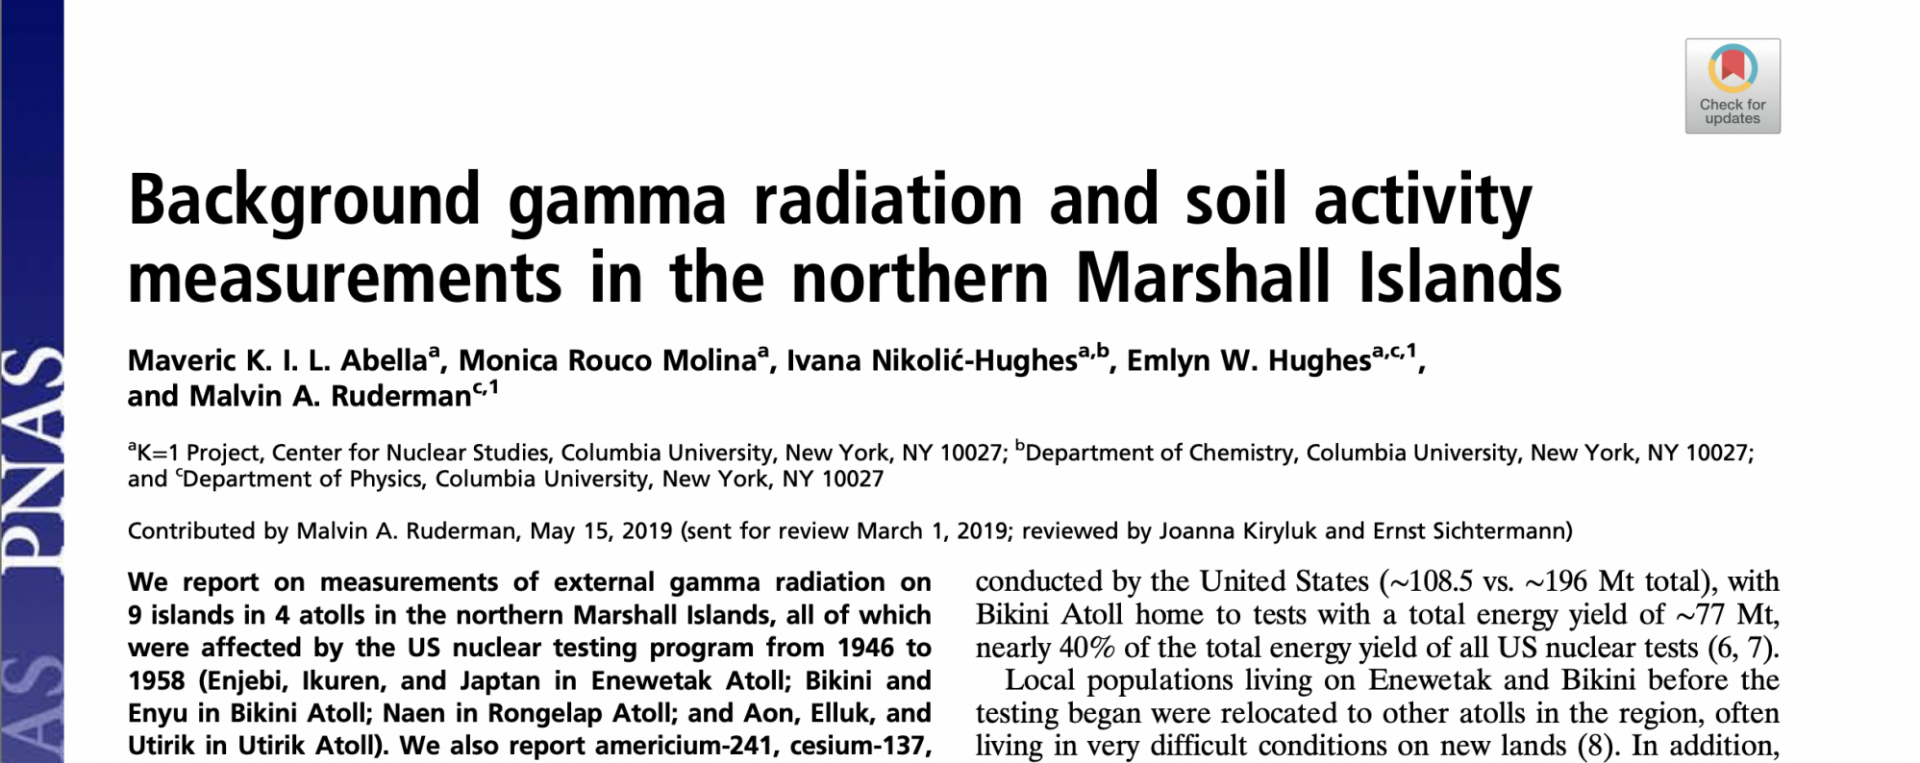 2019 publication in PNAS with measurements of background gamma radiation and soil activity taken on the K=1 Project's 2018 trip